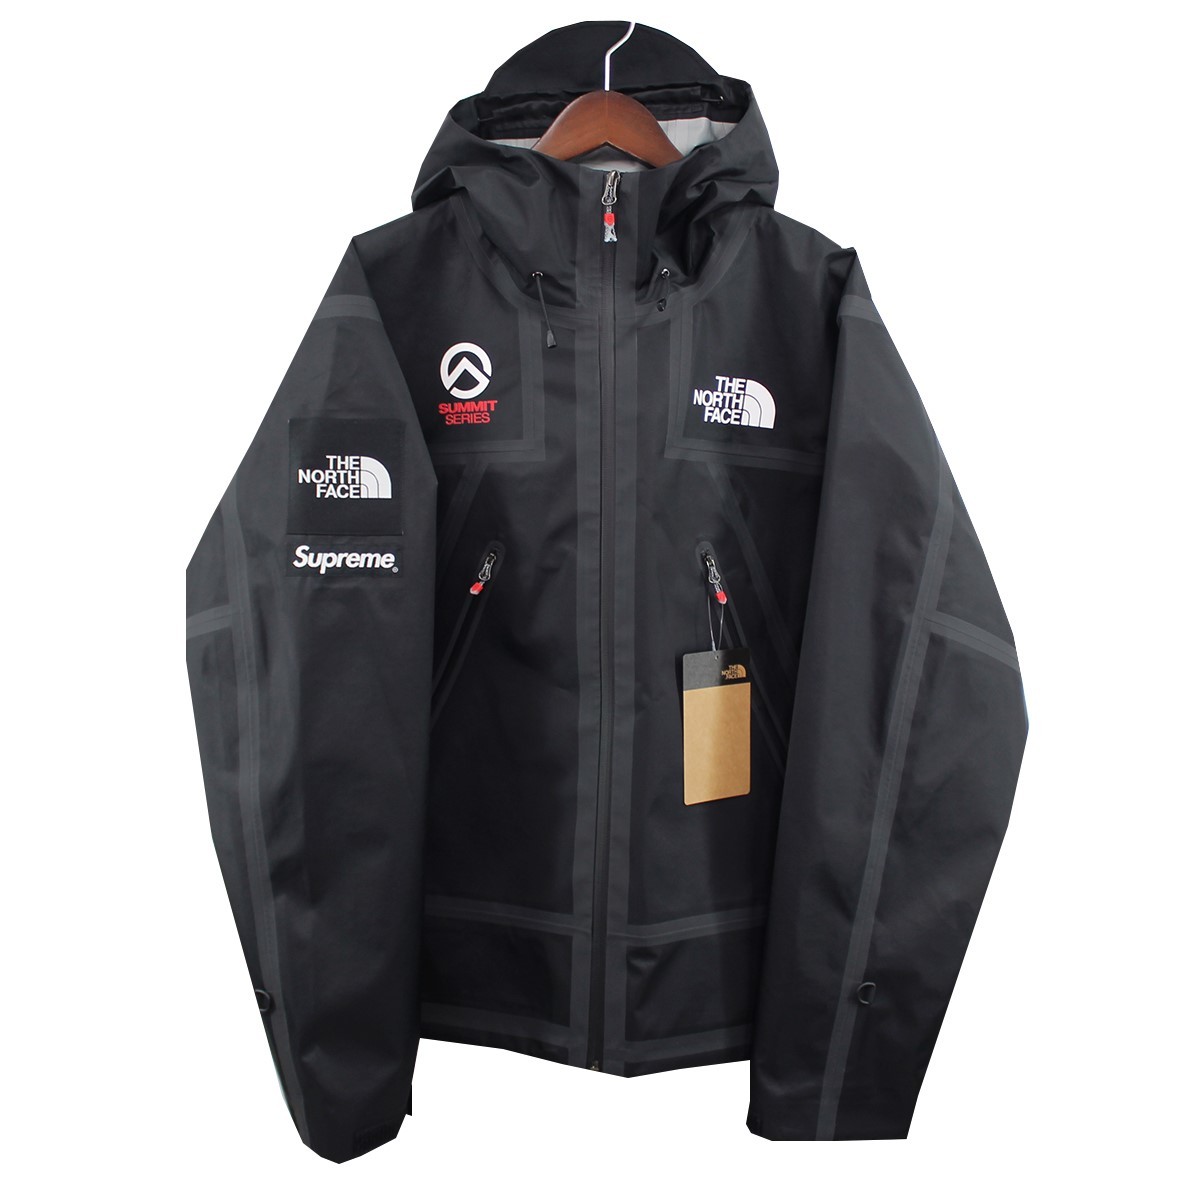 Supreme × THE NORTH FACE　 21SS Summit Series Outer Tape Seam Mountain Jacket 商品番号：8056000086263